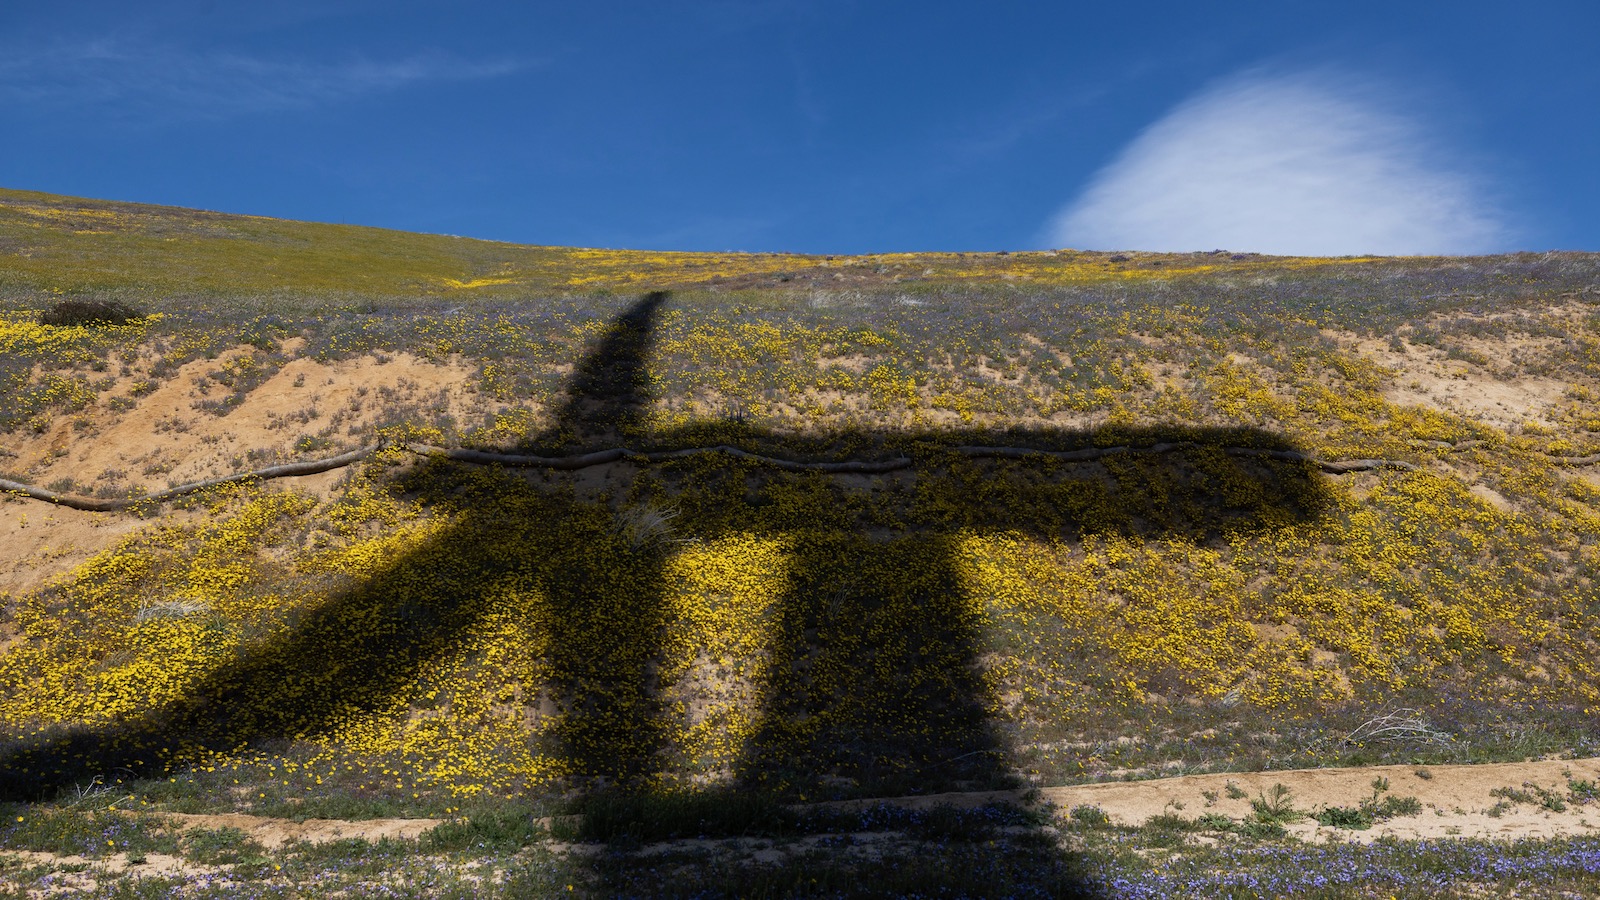 A wind turbine casts a large shadow over a hillside covered in wildflowers.